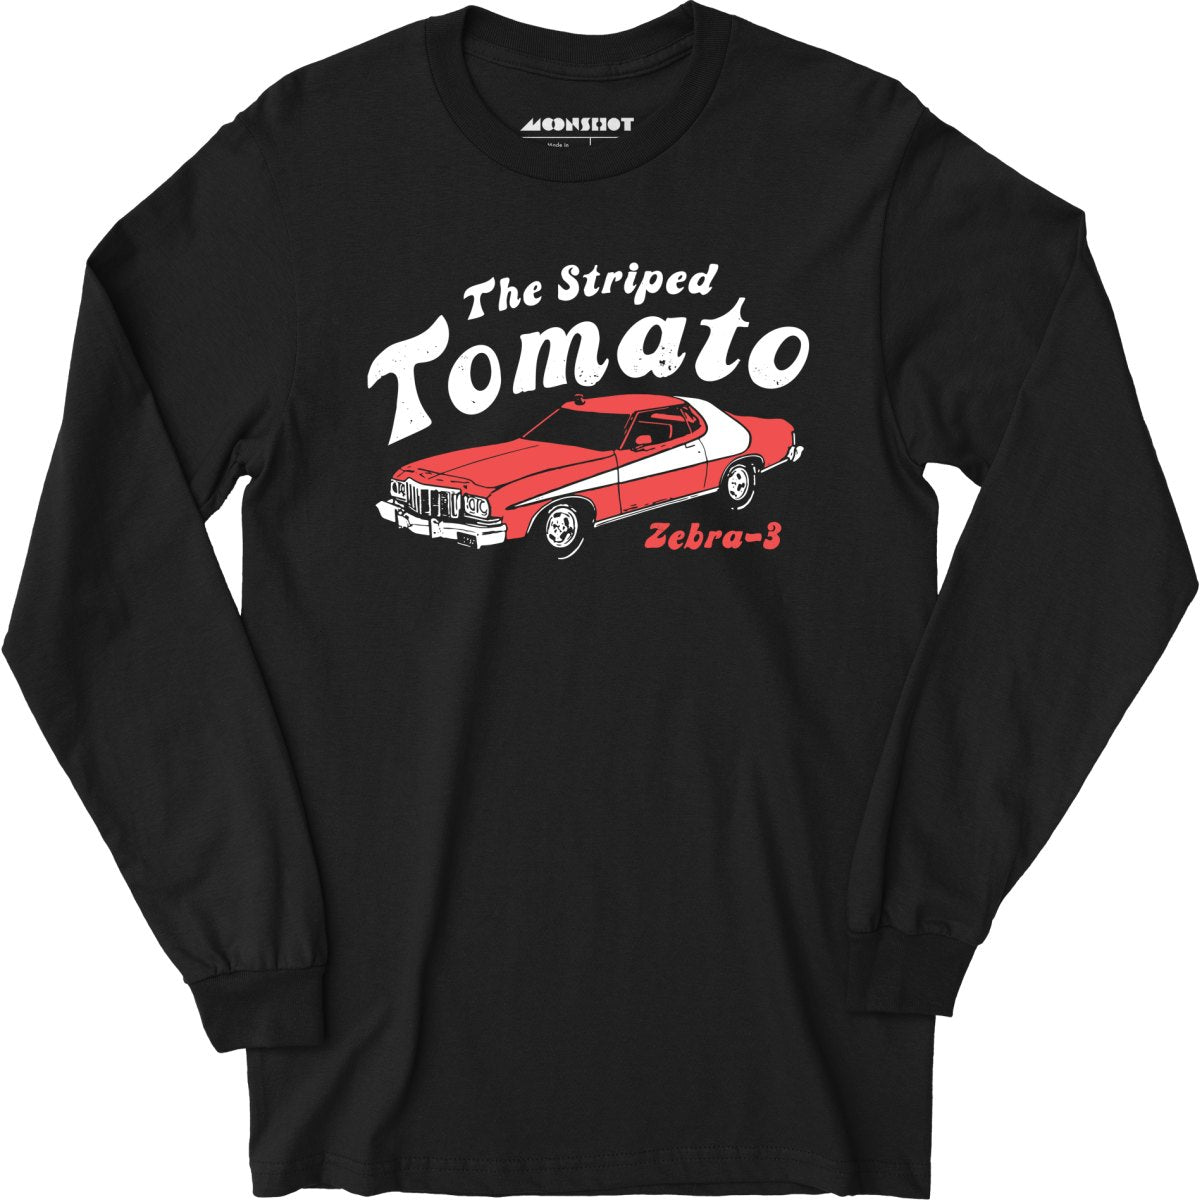 The Striped Tomato - Long Sleeve T-Shirt